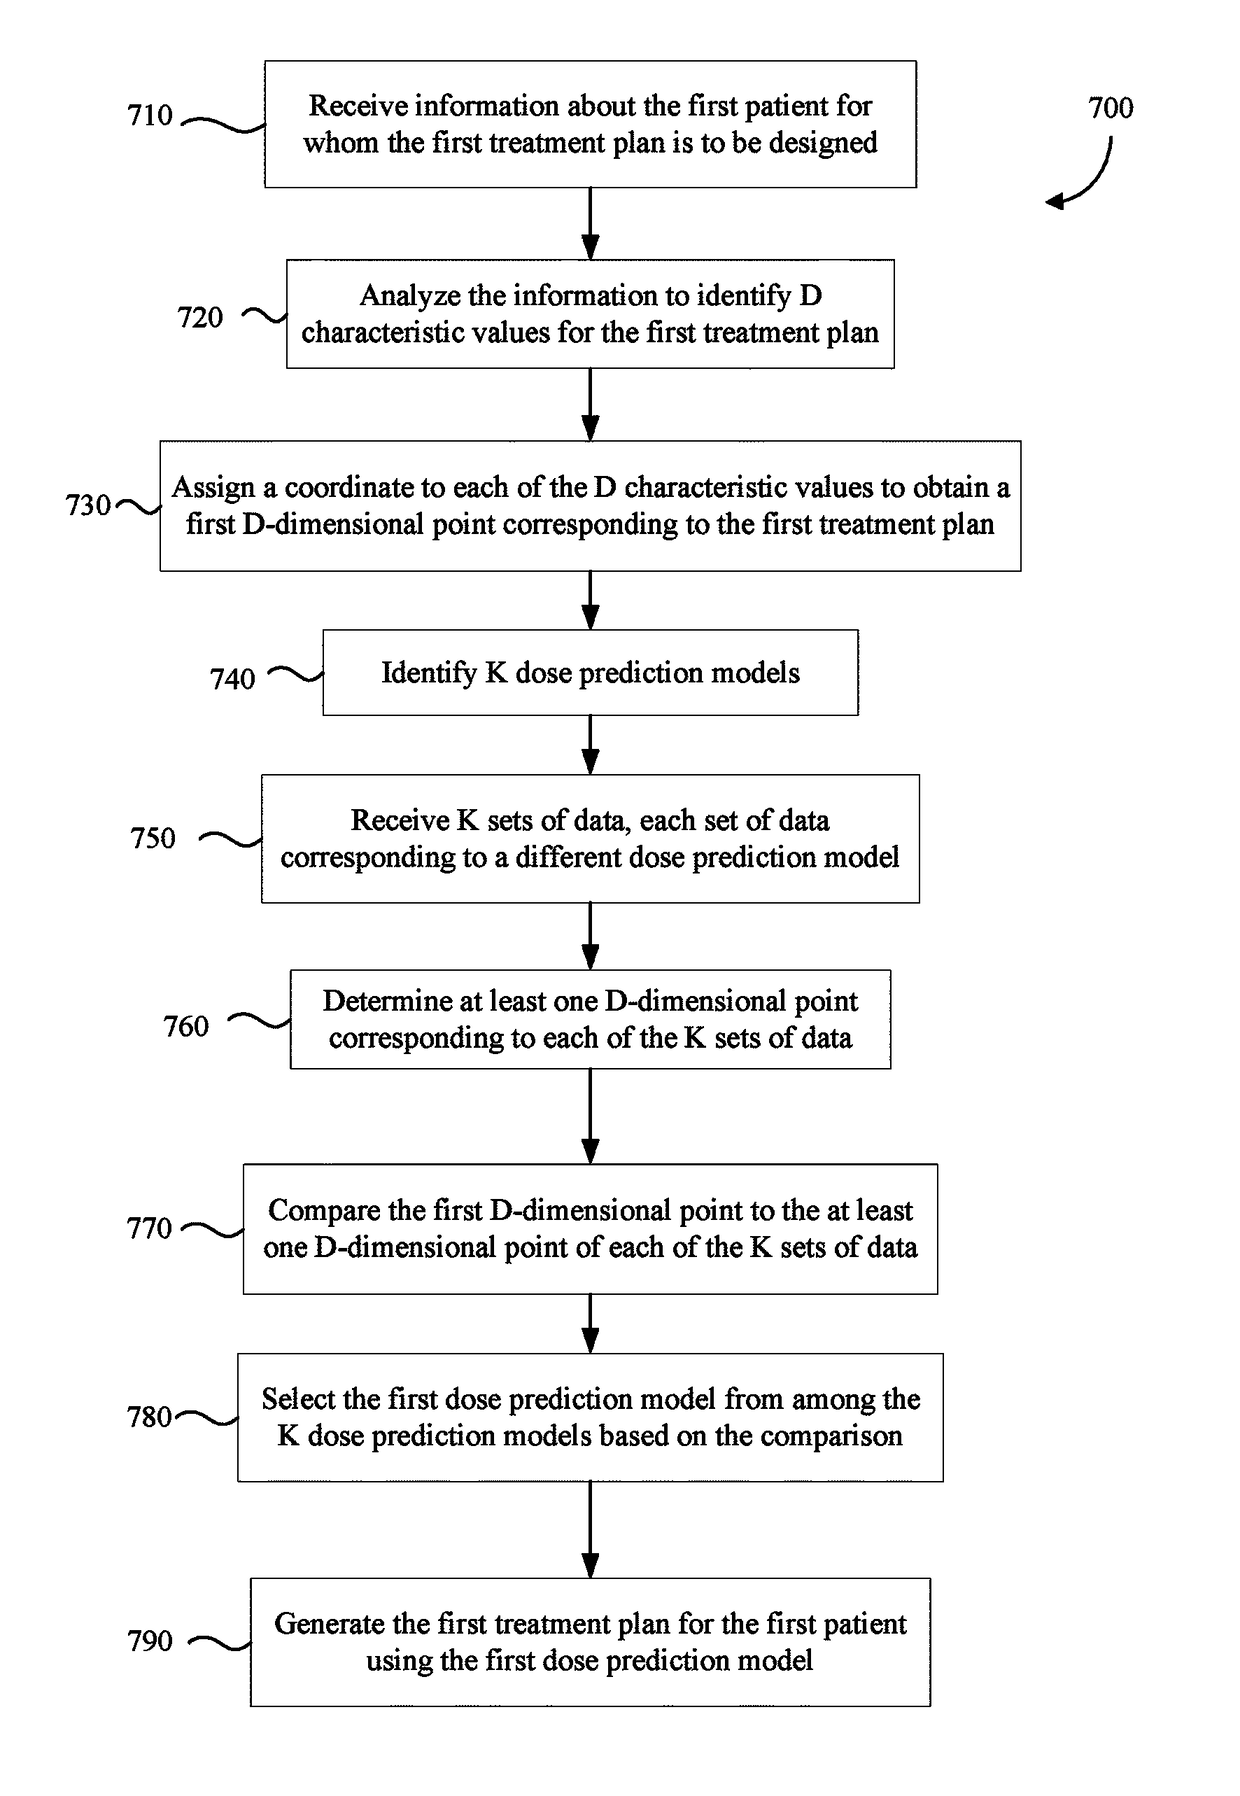 Automatic creation and selection of dose prediction models for treatment plans